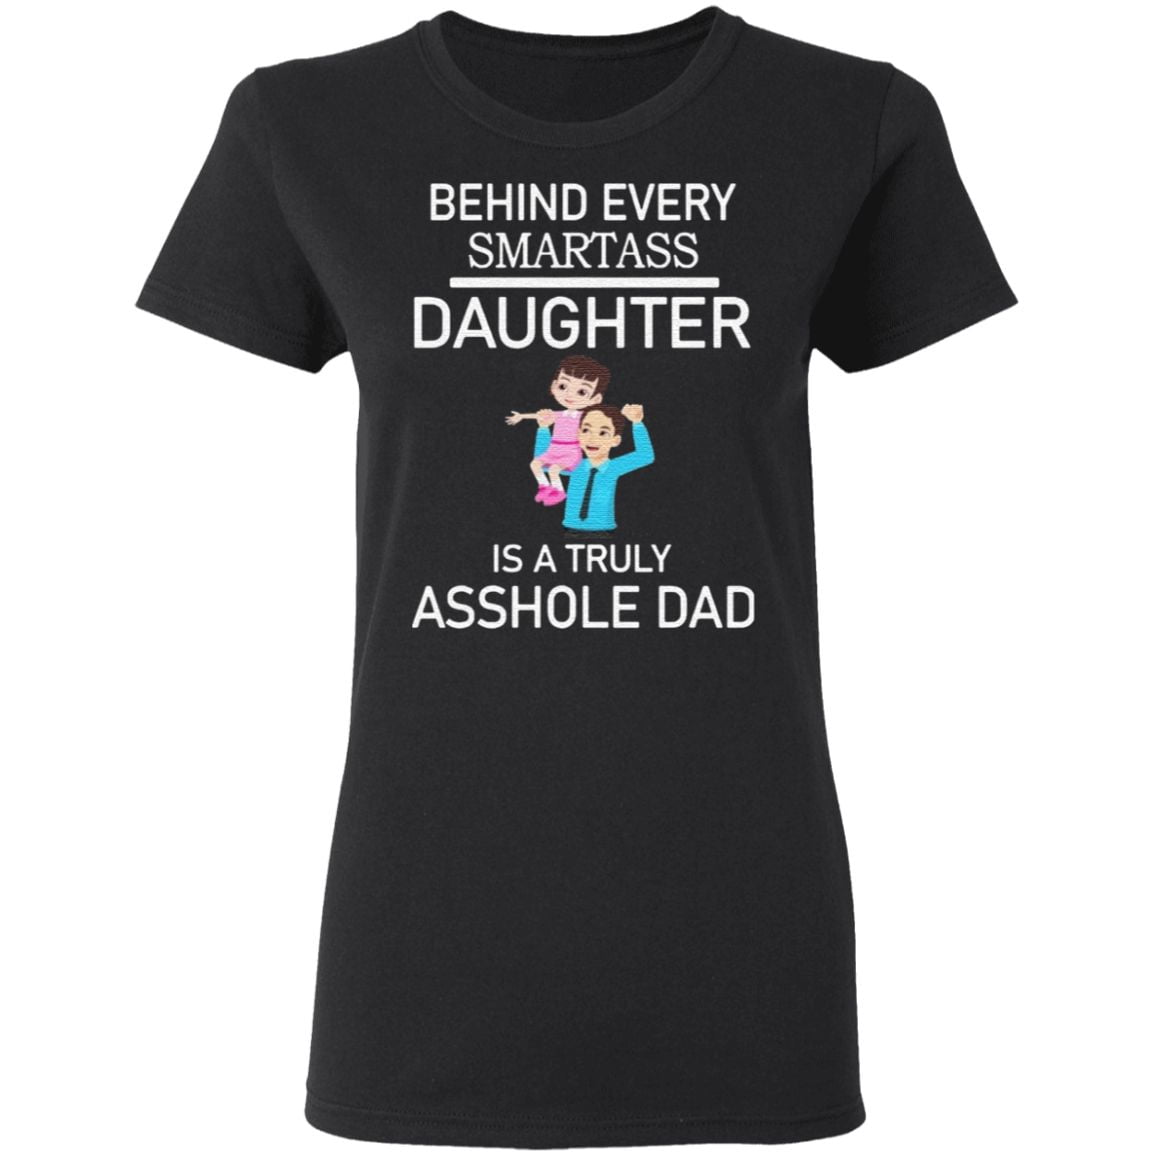 Behind Every Smartass Daughter Is A Truly Asshole Dad T Shirt